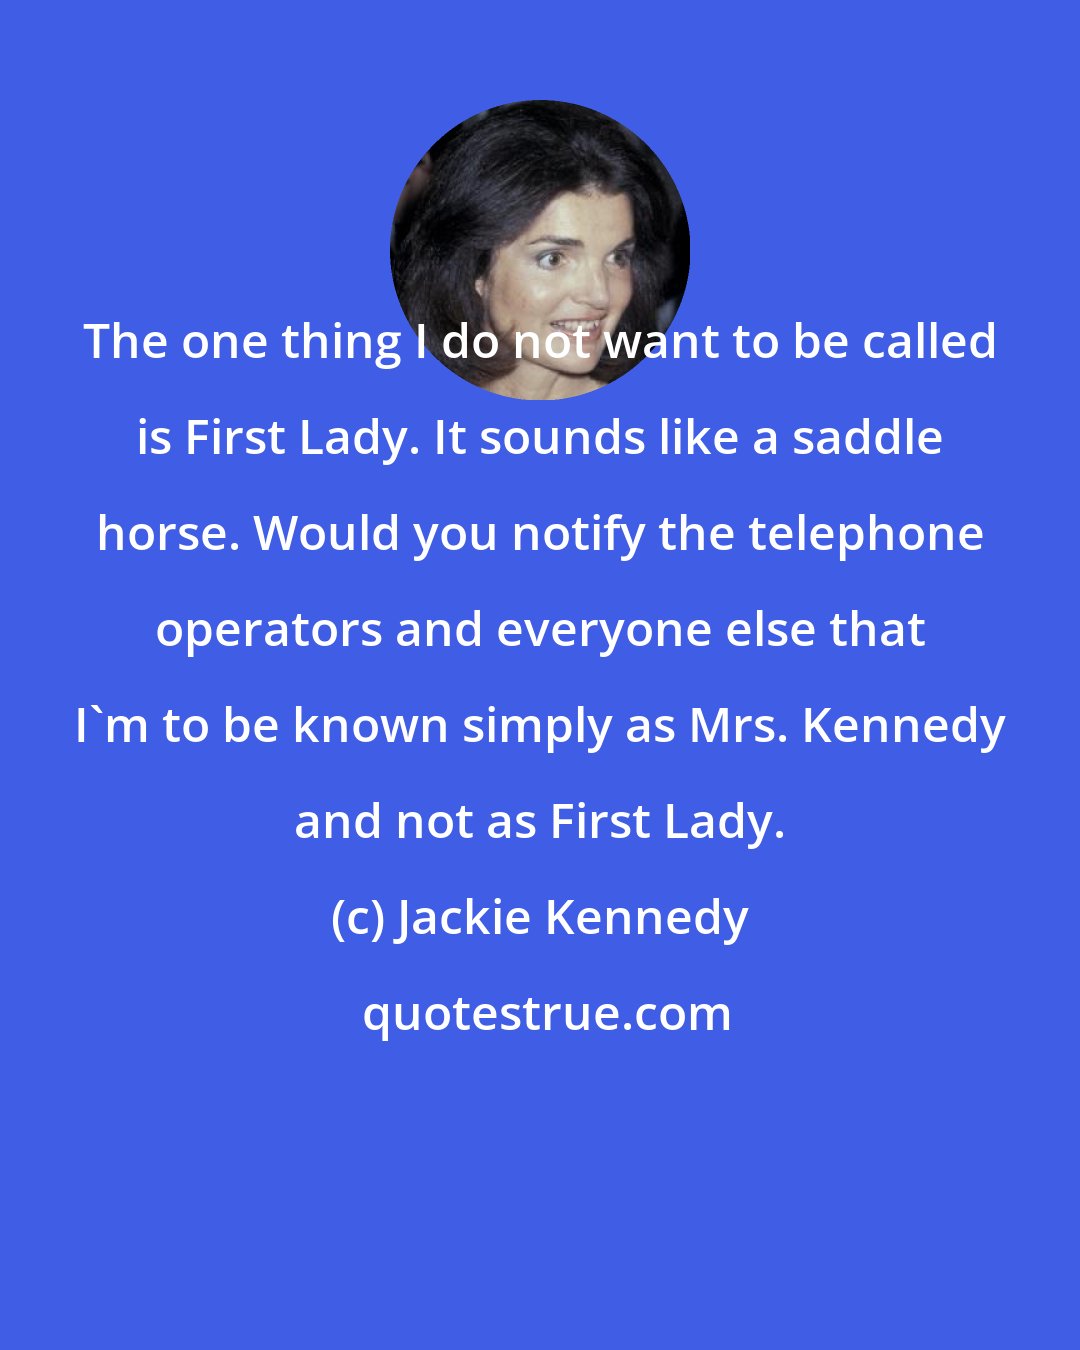 Jackie Kennedy: The one thing I do not want to be called is First Lady. It sounds like a saddle horse. Would you notify the telephone operators and everyone else that I'm to be known simply as Mrs. Kennedy and not as First Lady.